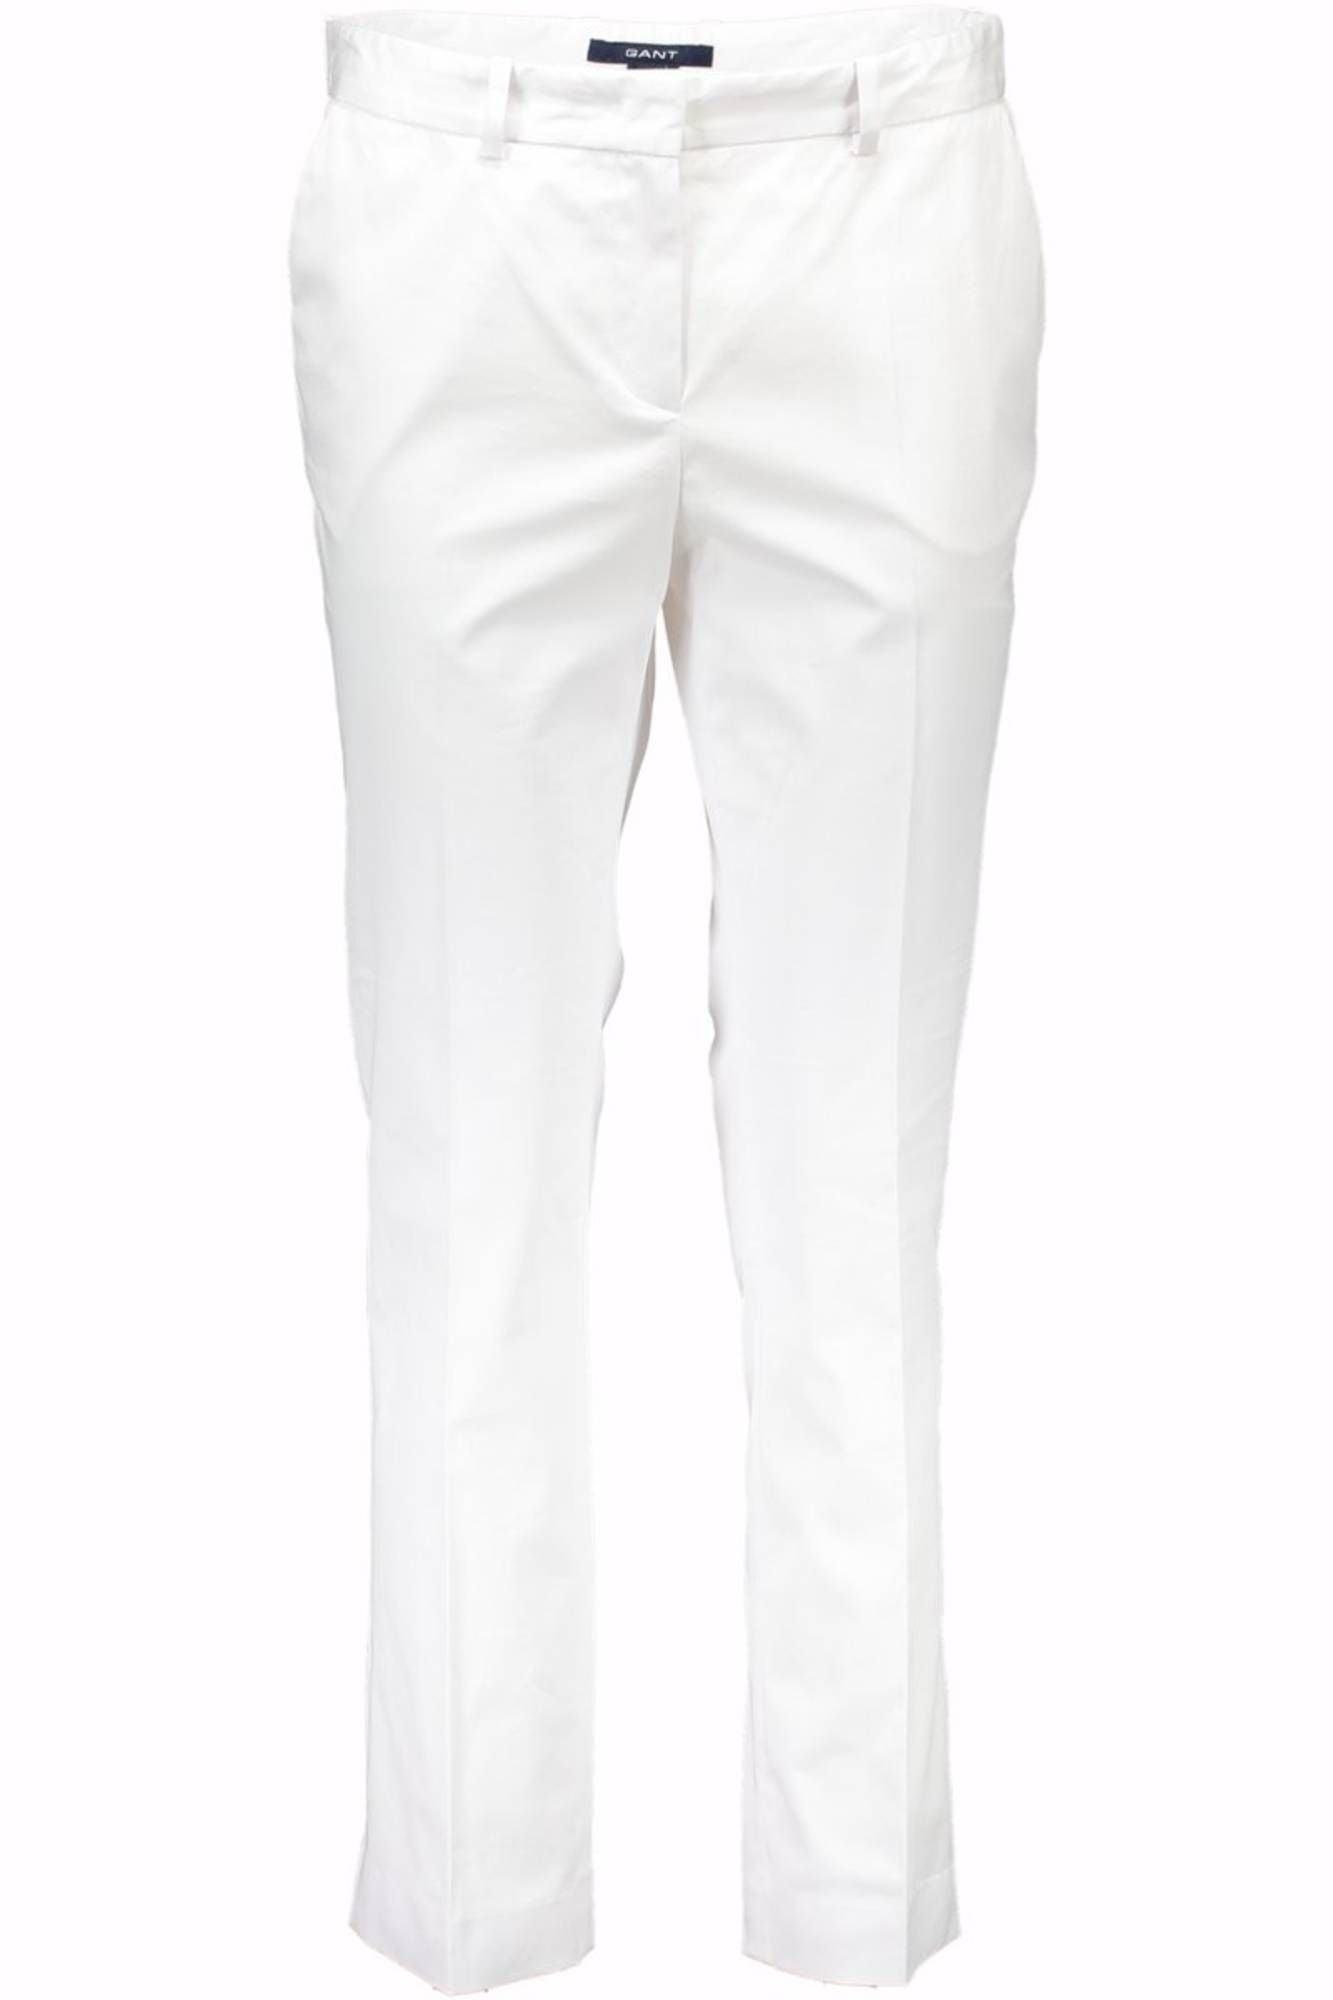 GANT Cotton Jeans & Pant in White | Lyst